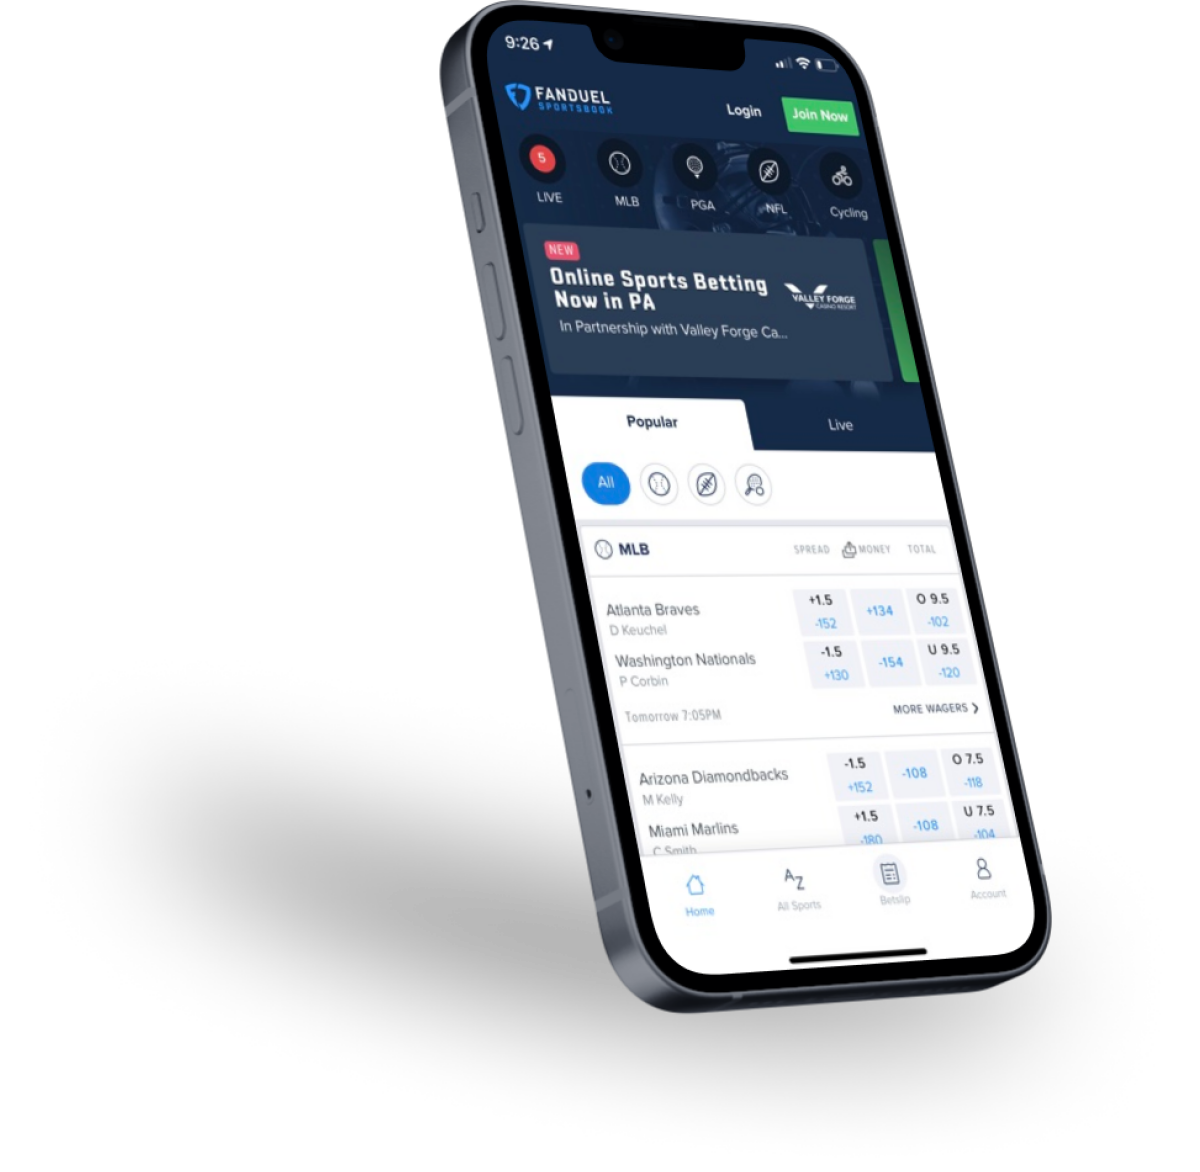 What's New About Online Ipl Betting App